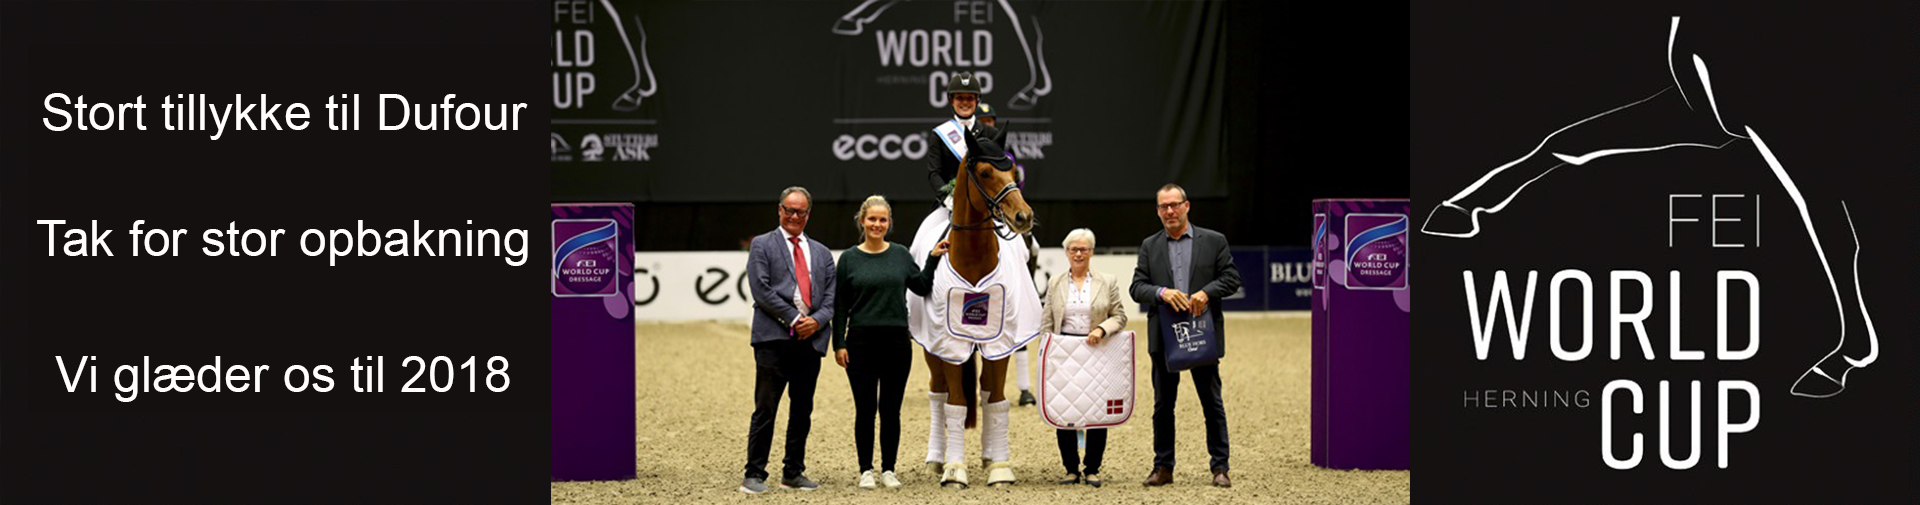 World Cup Herning 2018